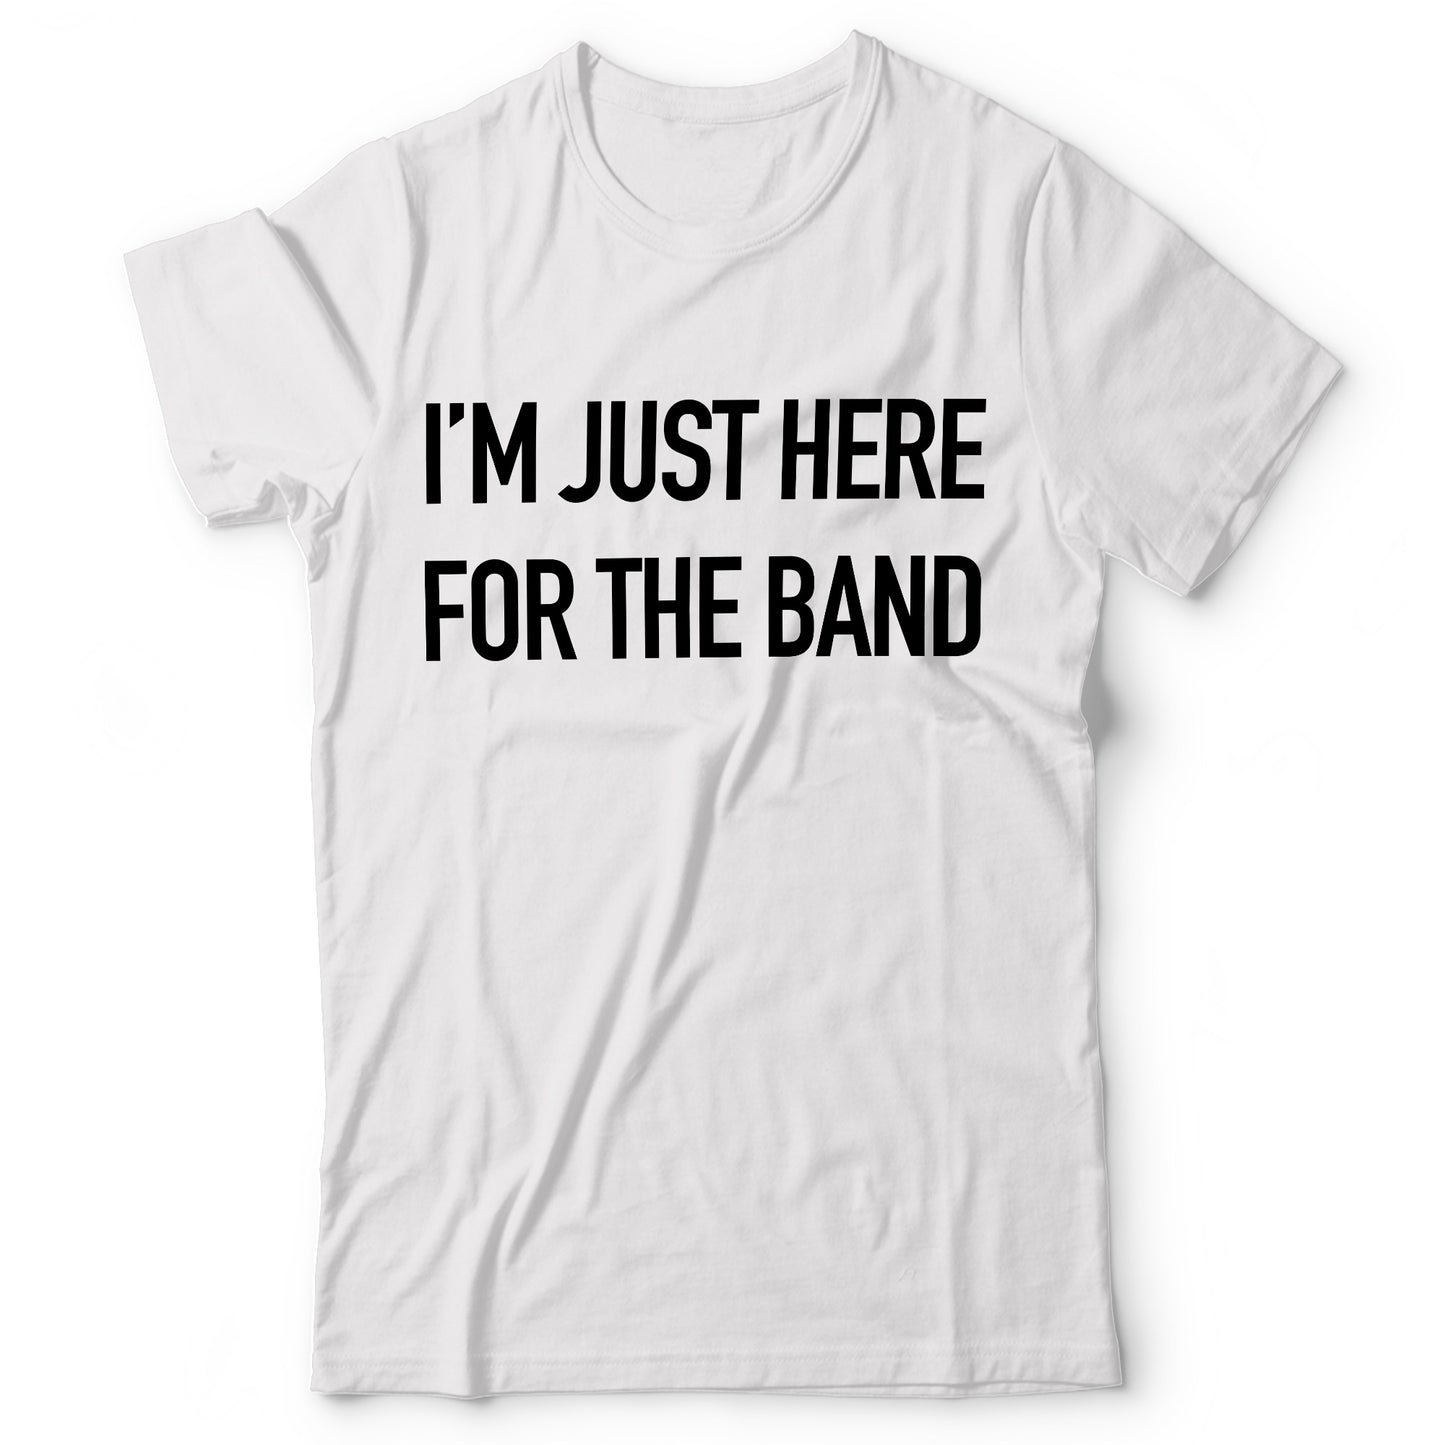 I’m Here For The Band - T-shirt